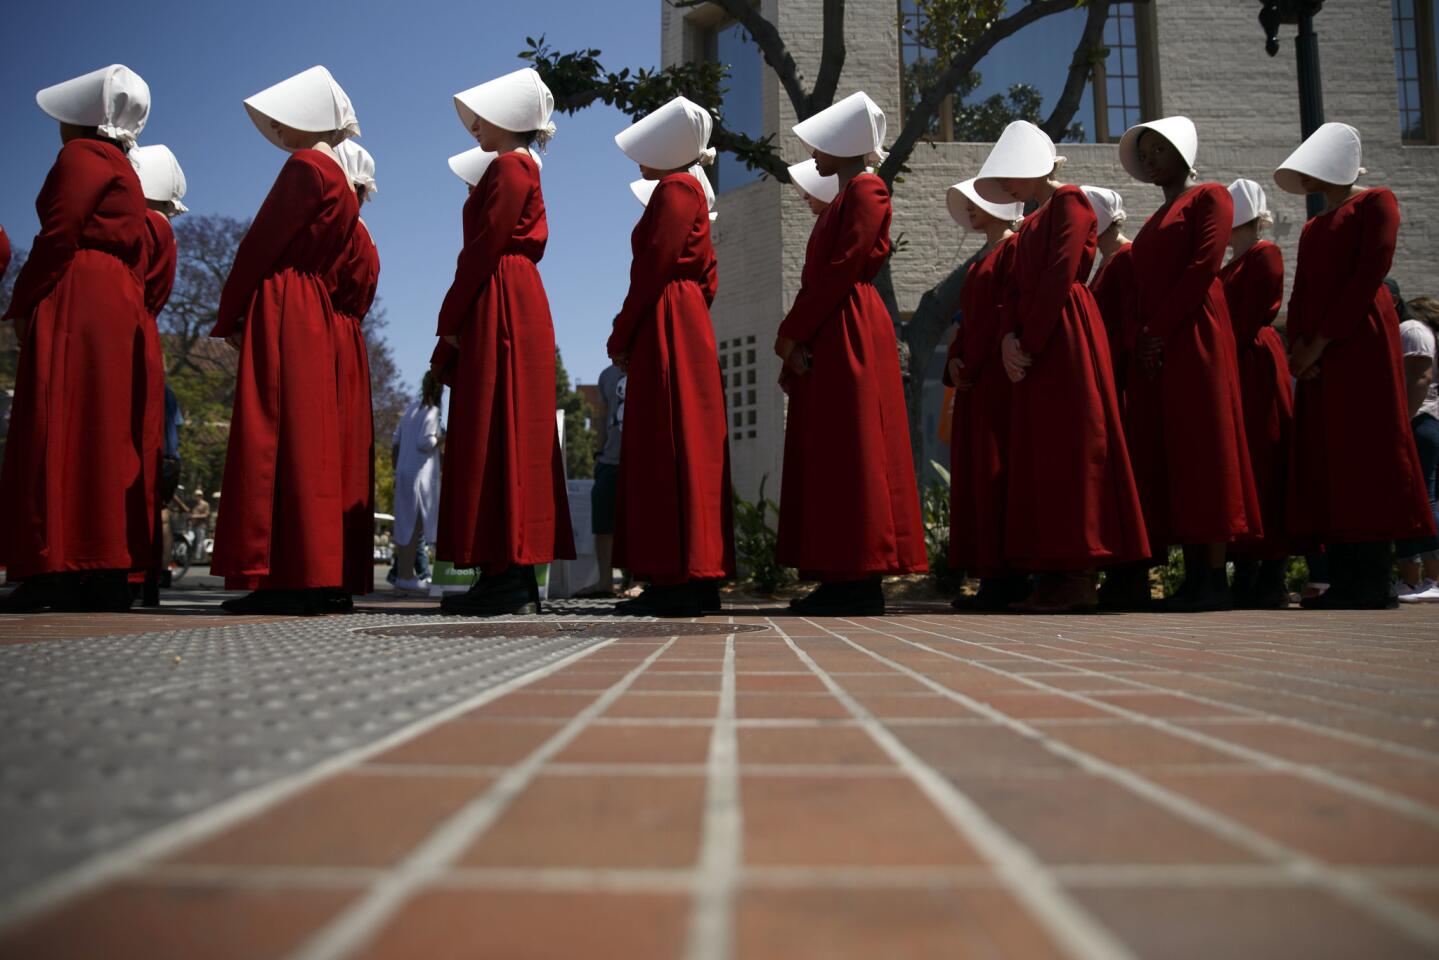 Hulu's adaptation of "The Handmaid's Tale" sent actresses to the Festival of Books on Sunday for som